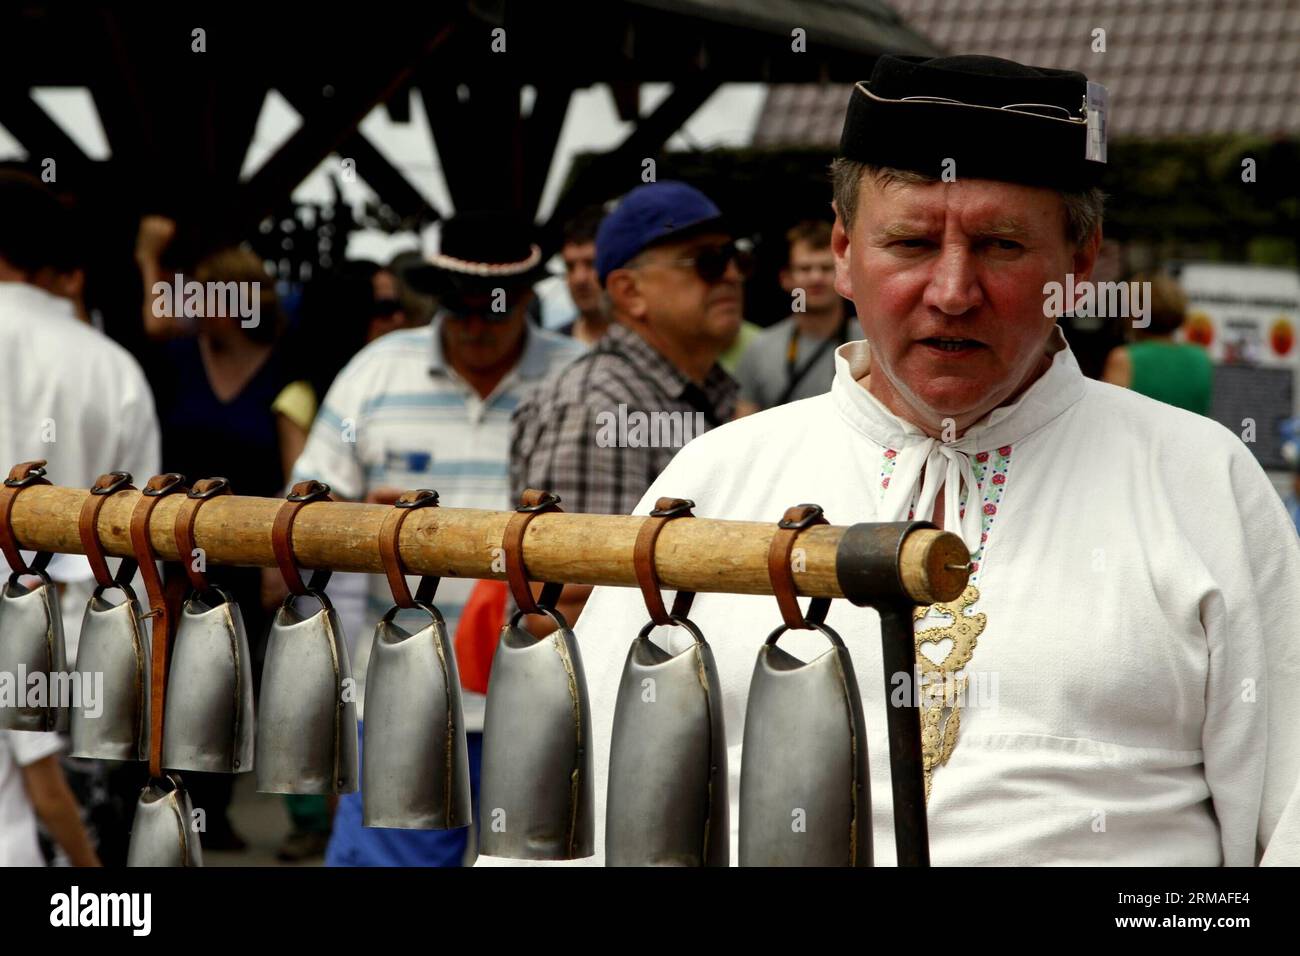 (140706) -- VYCHODNA, July 6, 2014 (Xinhua) -- A man presents bells of his own family craft during the Vychodna Folklore Festival in Vychodna, Slovakia, July 6, 2014. The Vychodna Folklore festival was held from Wednesday to Sunday to attract folklorists from Slovakia and neighboring countries. Around 1400 folklore groups appeared on the stages of the festival. (Xinhua/Erik Adamson) (zjy) SLOVAKIA-VYCHODNA-FESTIVAL PUBLICATIONxNOTxINxCHN   July 6 2014 XINHUA a Man Presents Bells of His Own Family Craft during The  Folklore Festival in  Slovakia July 6 2014 The  Folklore Festival what Hero from Stock Photo